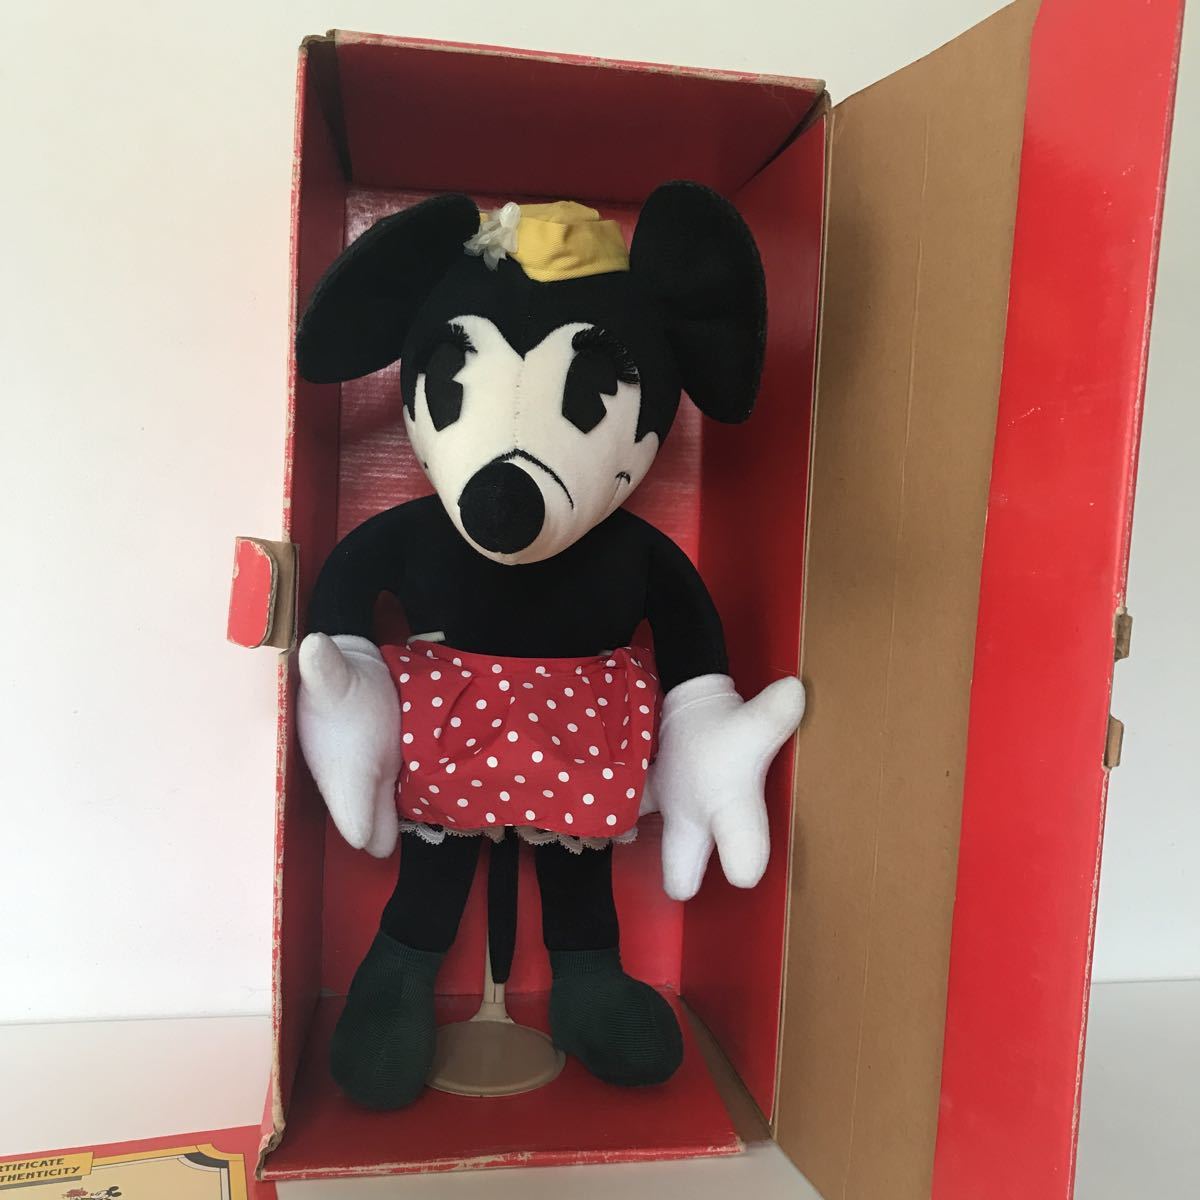  ultra rare America rose ball limitation one ten thousand body 1990 serial number 5509 soft toy Minnie Mouse Disney 90 period retro minnie USA Roth 